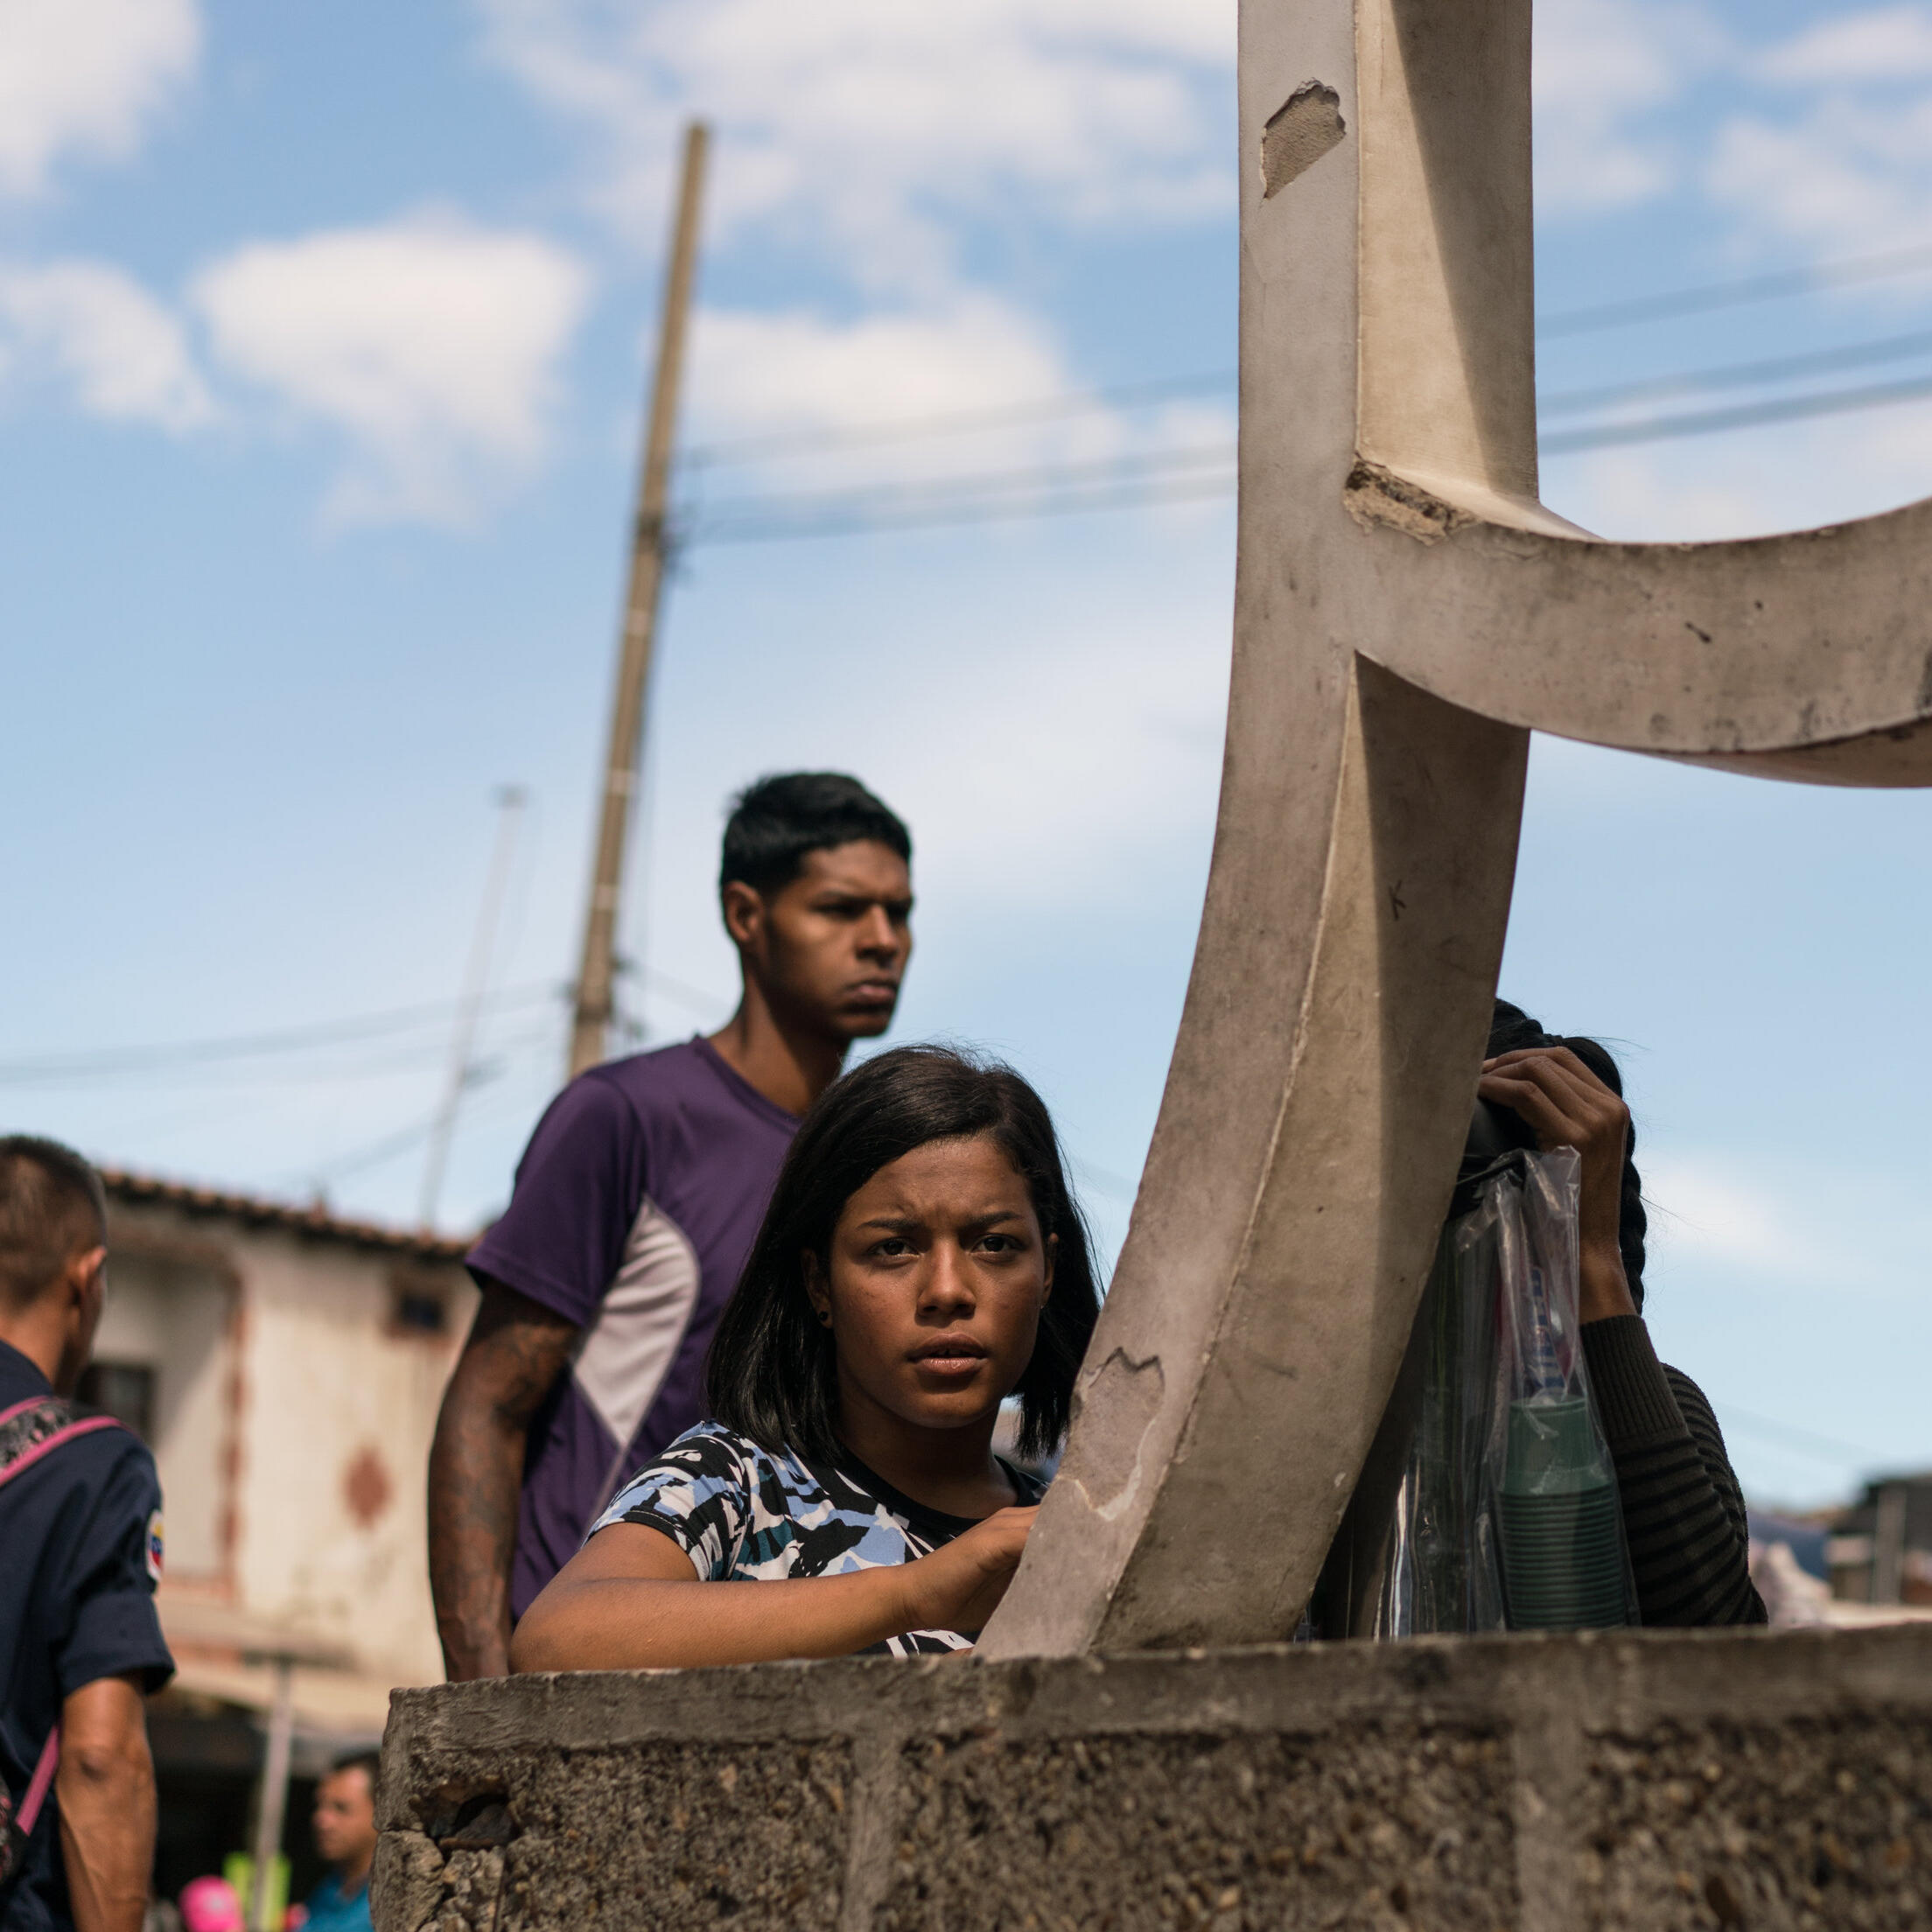 A young girl on the Simon Bolivar Bridge, Colombia. May 22, 2018.